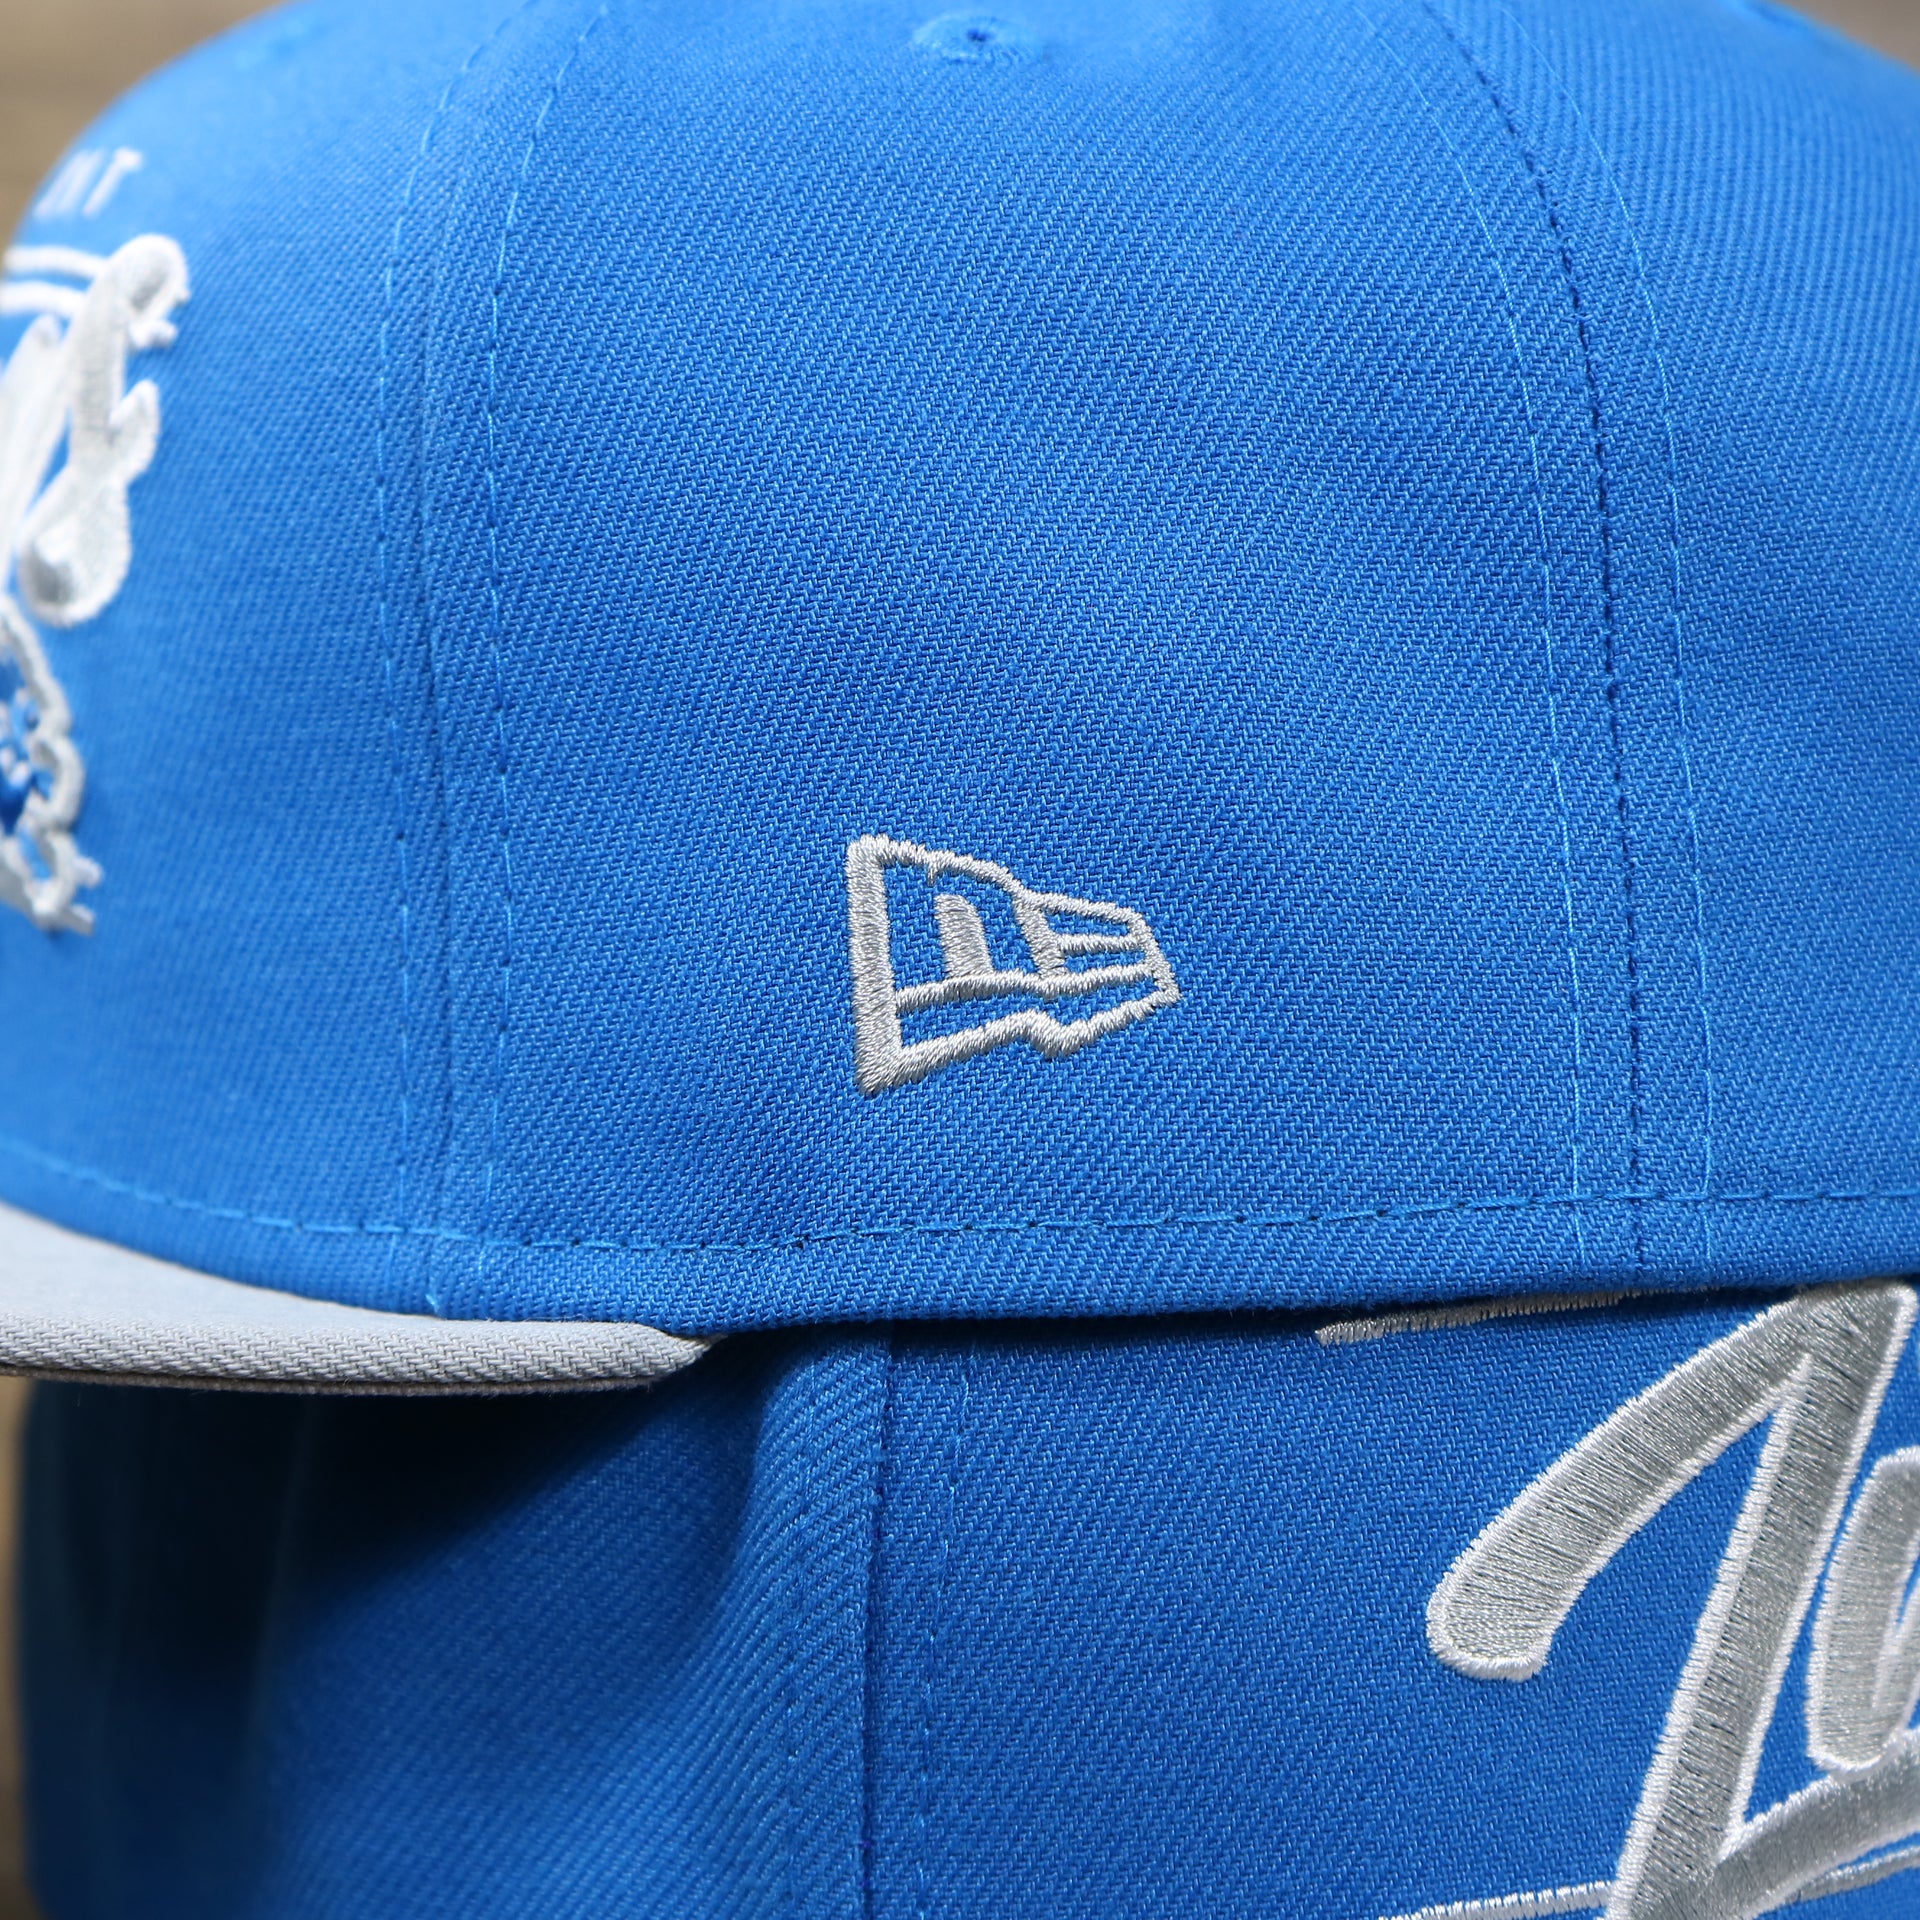 The New Era logo on the Detroit Lions Team Script Gray Bottom 9Fifty Snapback | Blue and Gray Snap Cap